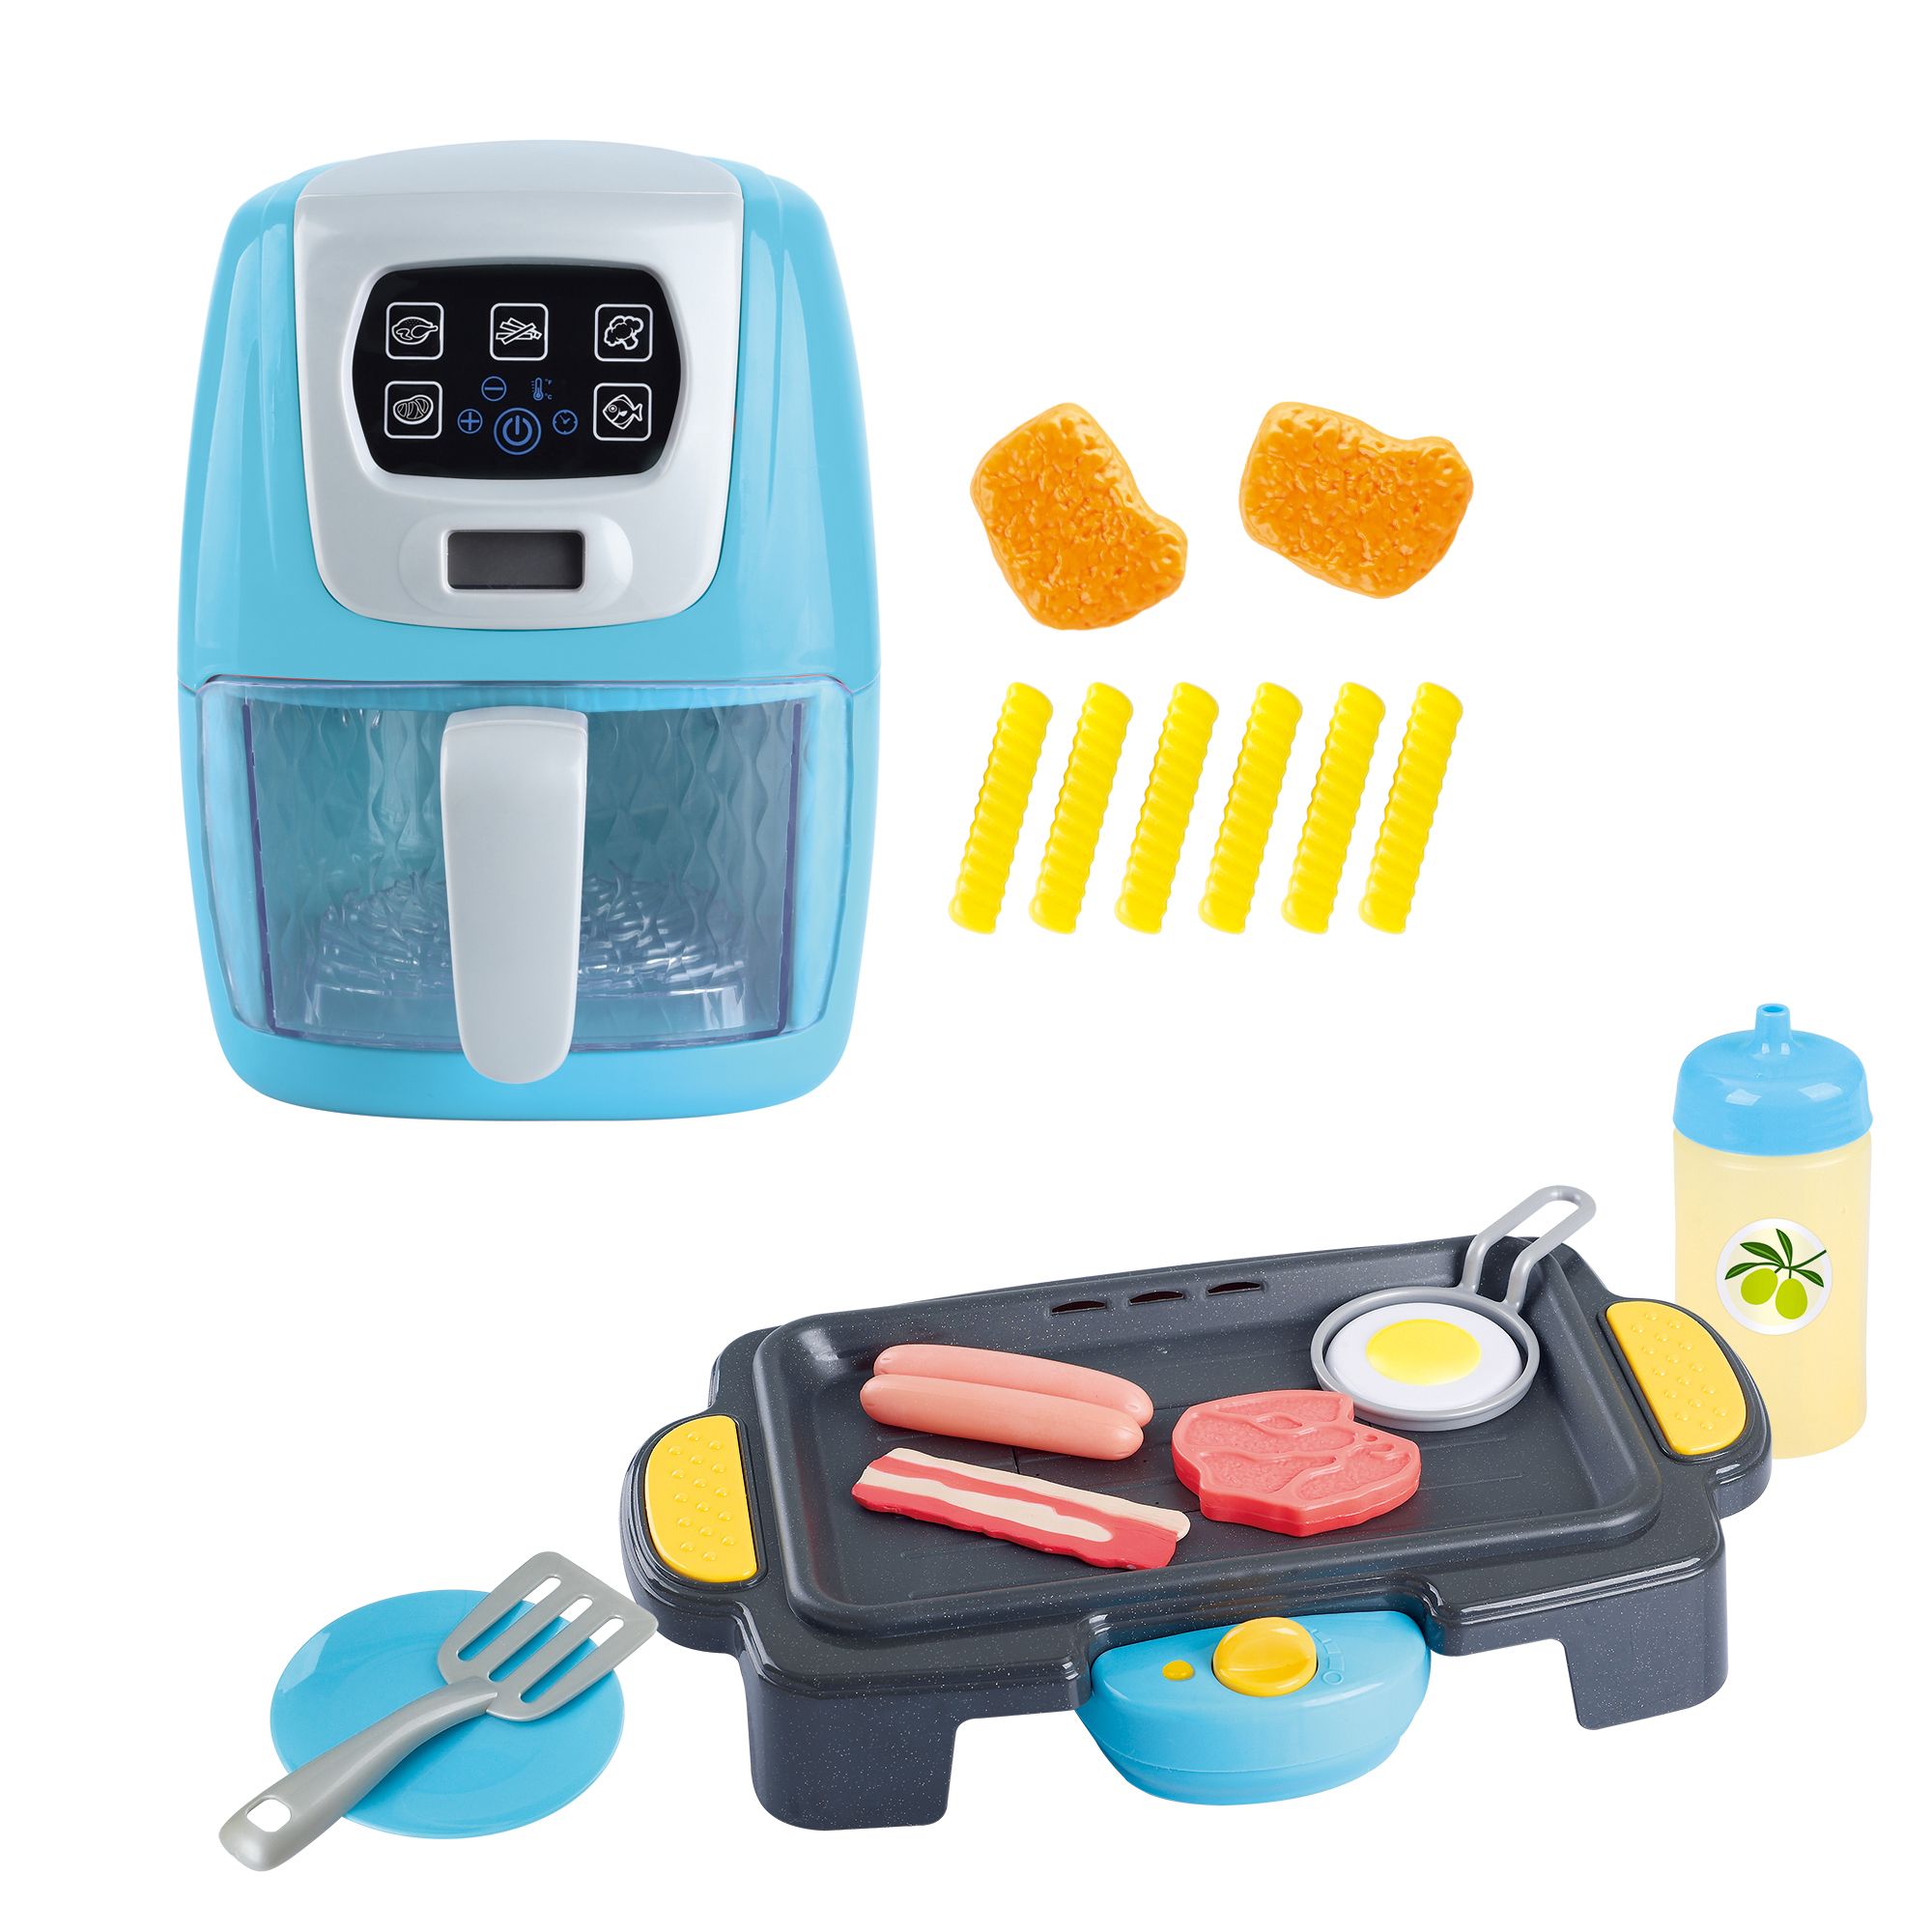 Toy Air Fryer for Kids, Kids Play Kitchen Playset Accessories, Chefs  Pretend Play Kitchen Appliance Toys Oven w/Light, Sound, Play Food Grill  Cooking